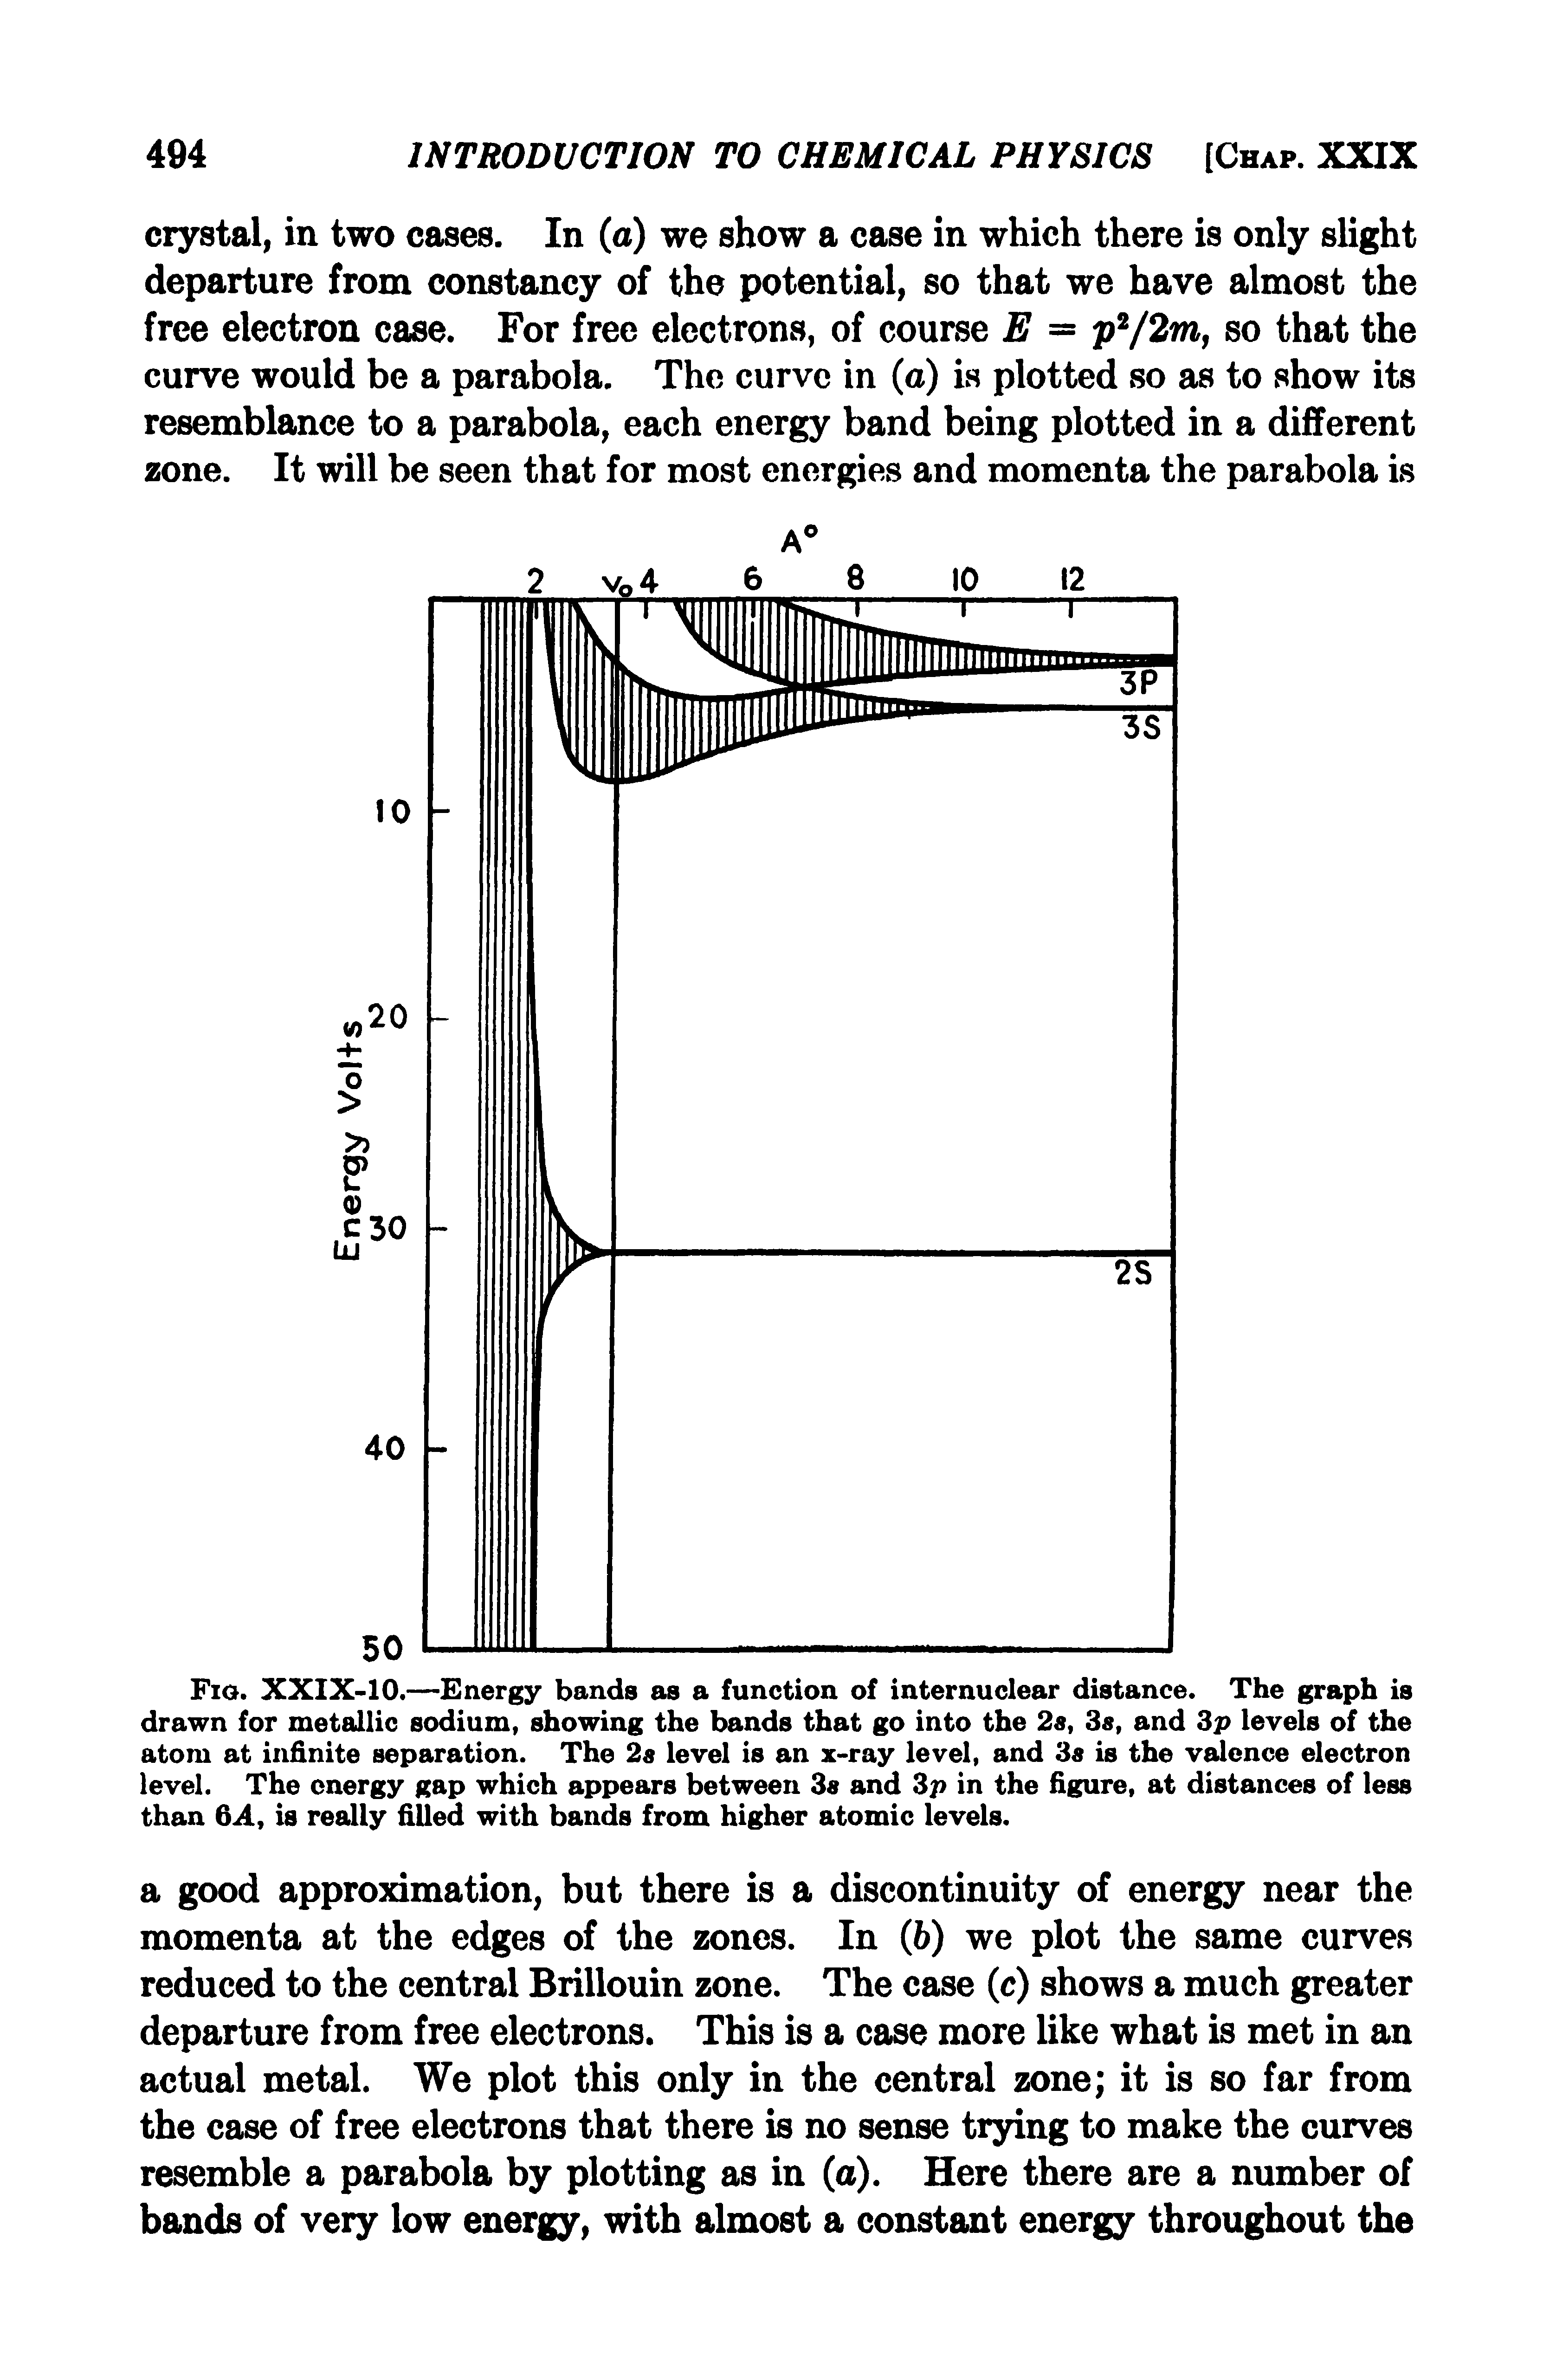 Fig. XXIX-10.—Energy bands as a function of internuclear distance. The graph is drawn for metallic sodium, showing the bands that go into the 2a, 3s, and 3p levels of the atom at infinite separation. The 2s level is an x-ray level, and 3s is the valence electron level. The energy gap which appears between 3s and 3p in the figure, at distances of less than 6A, is really filled with bands from higher atomic levels.